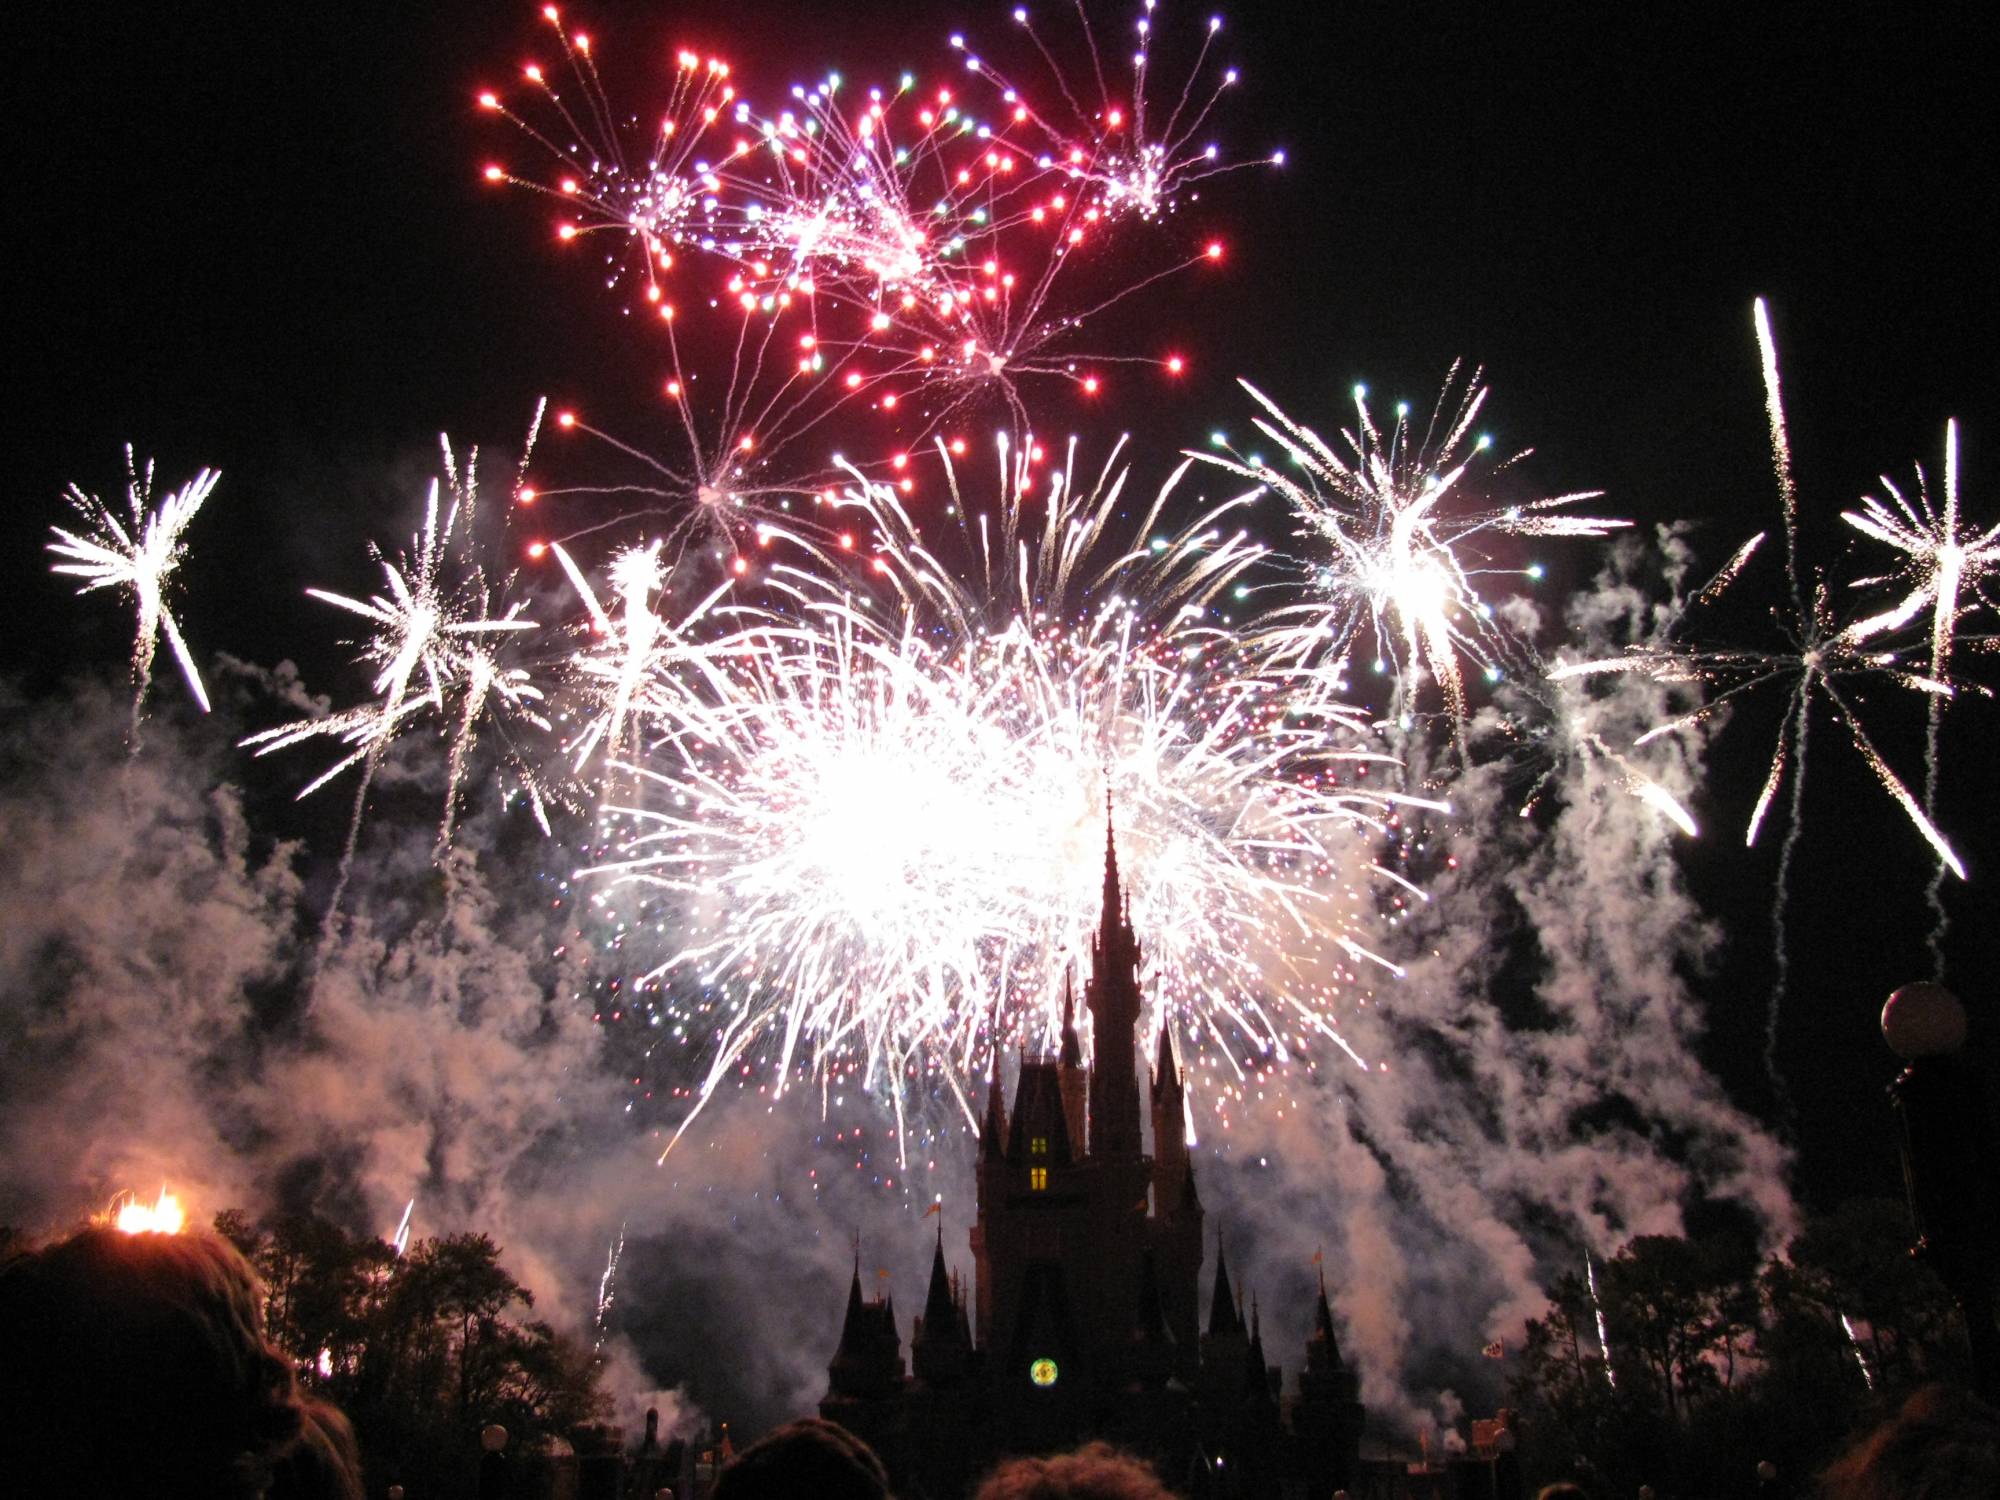 Wishes in front of Cinderella's Castle at Magic Kingdom